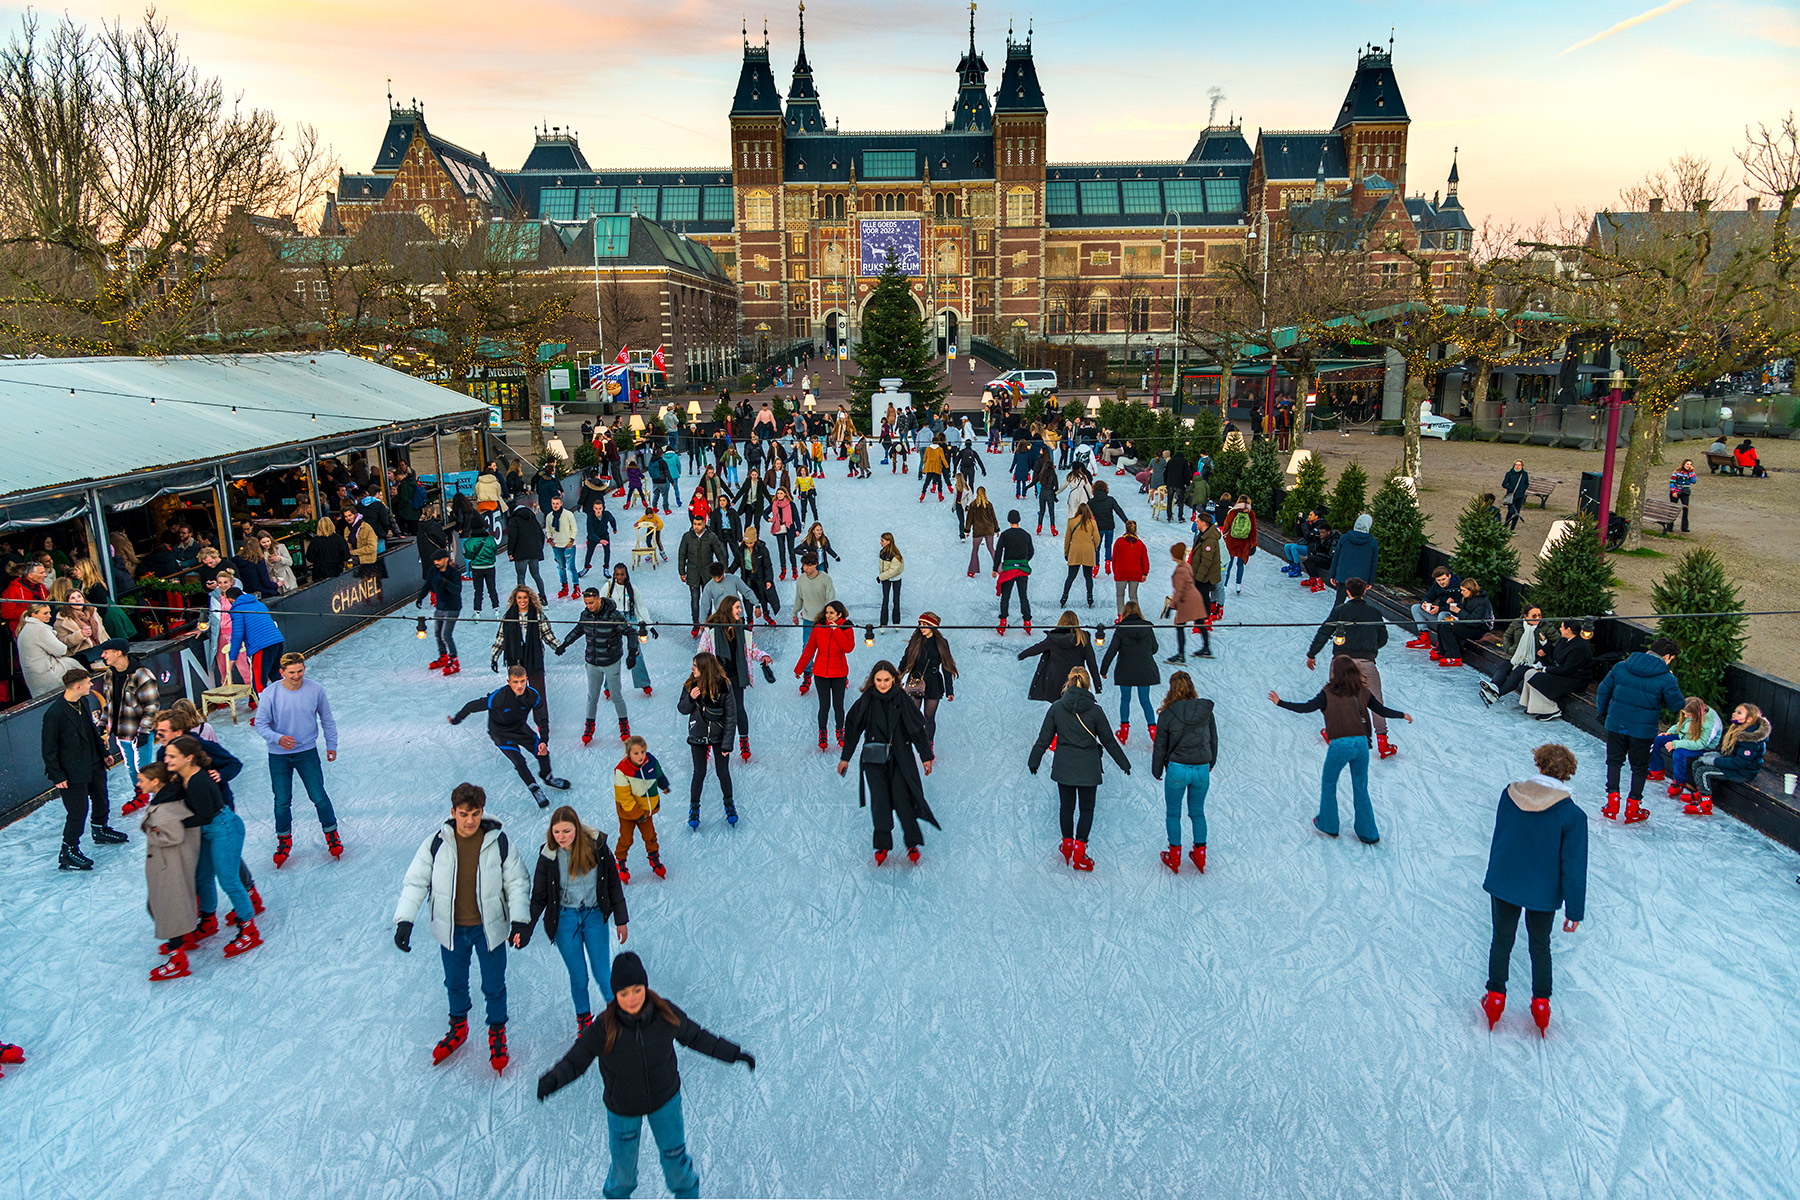 People ice skating on a rink outside the Rijksmuseum in the Netherlands